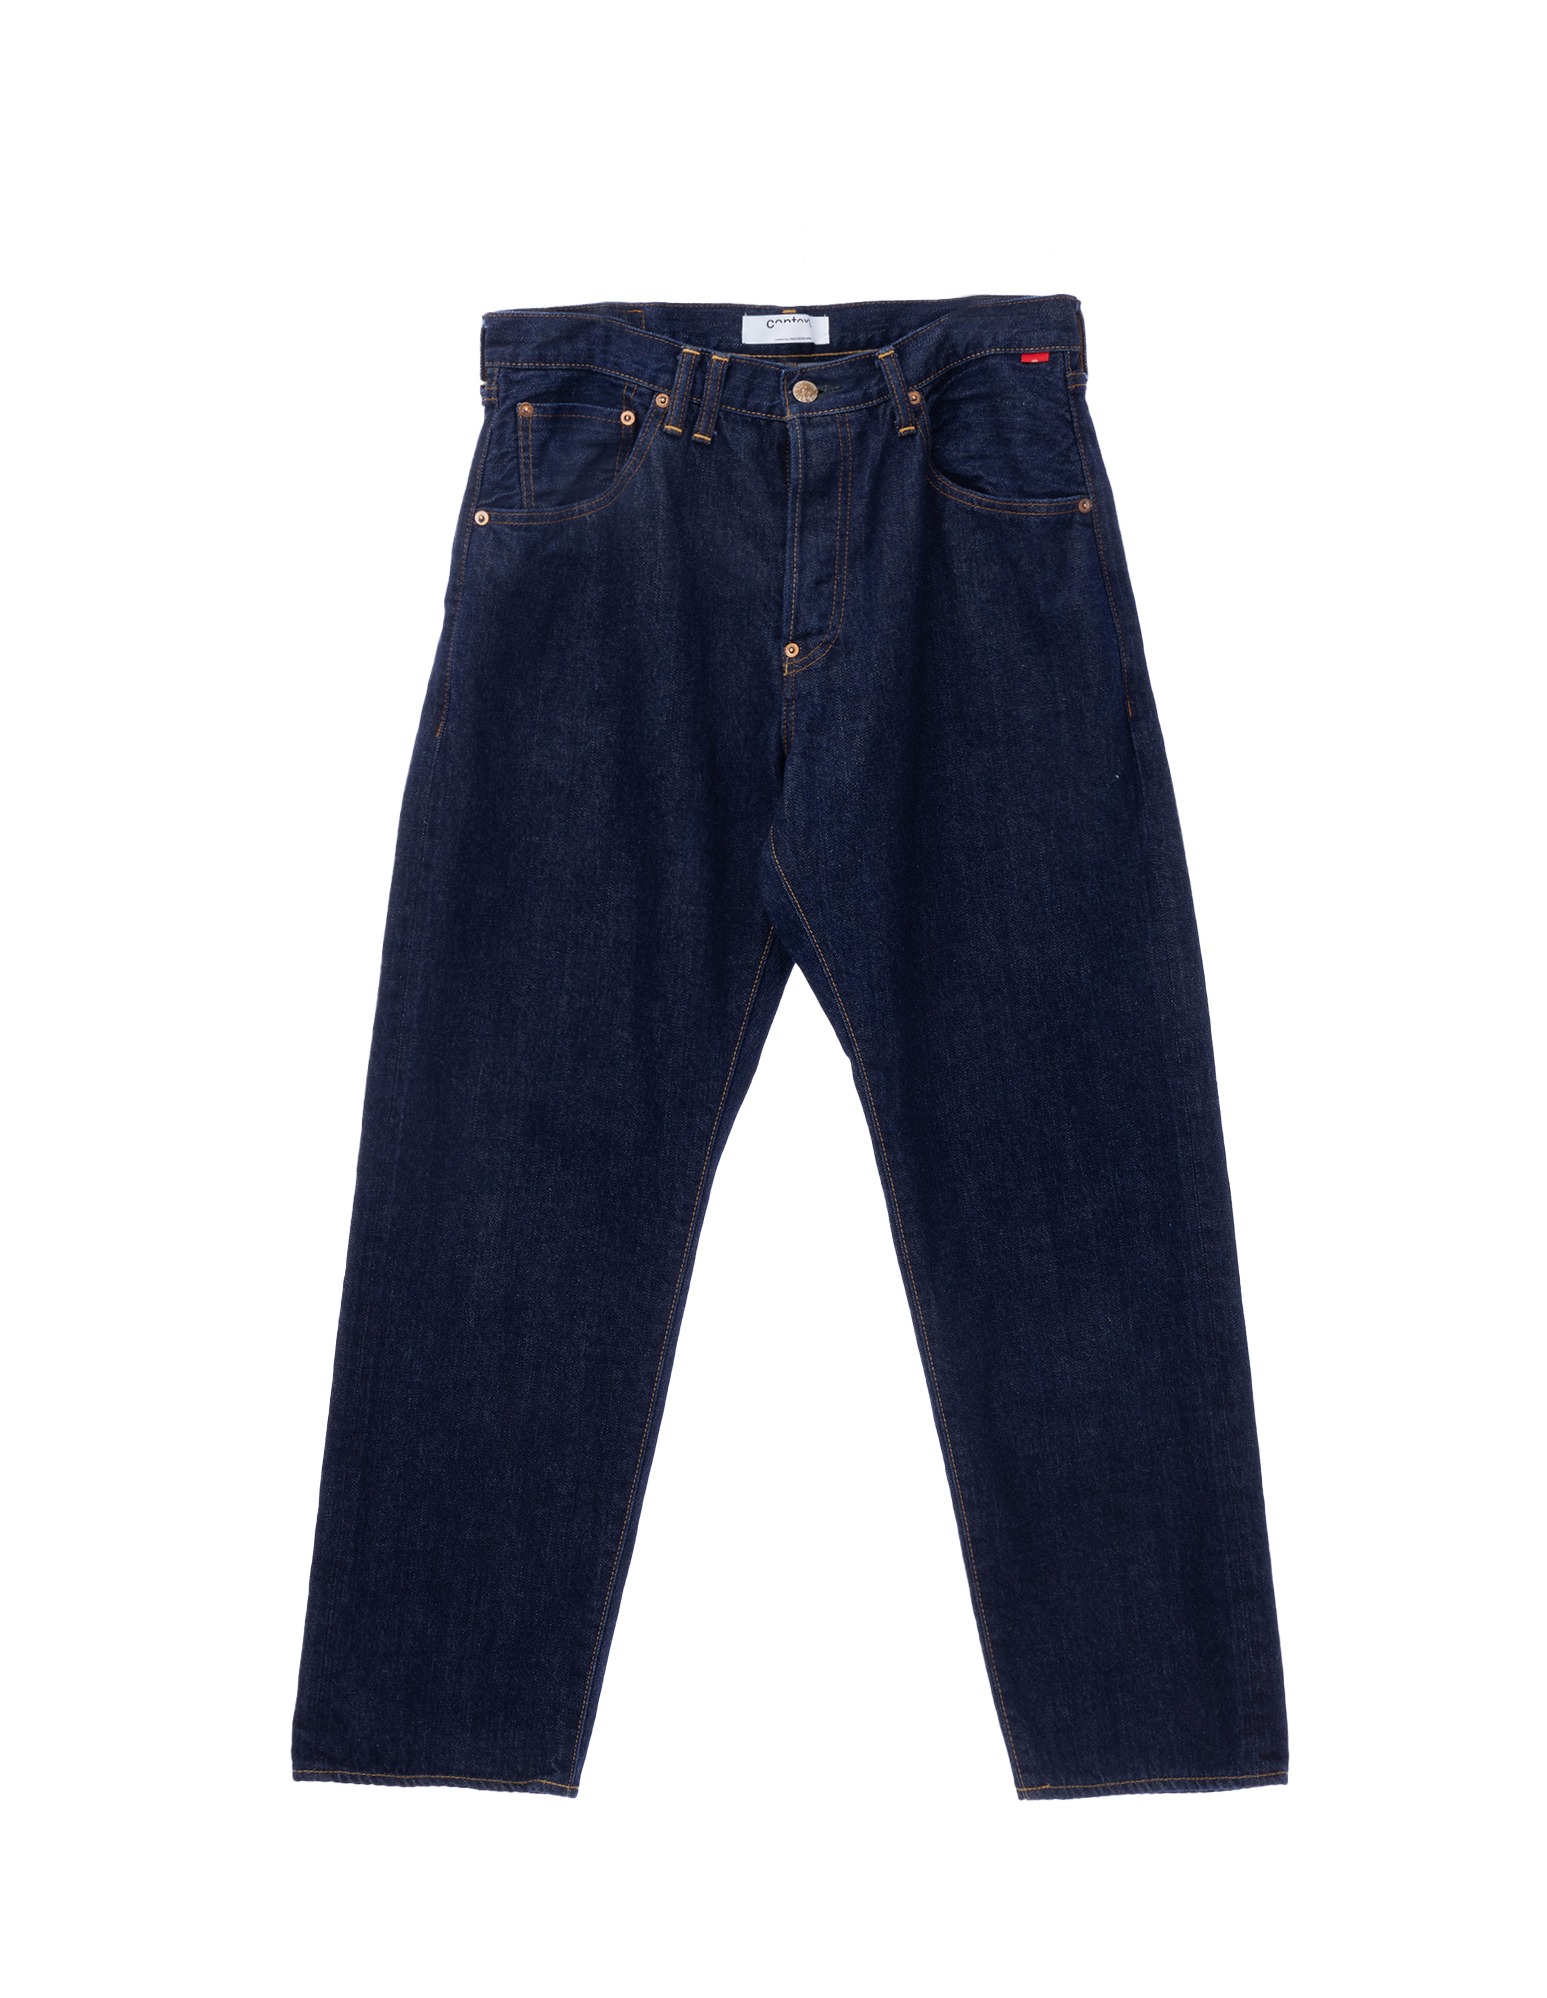 CONTEXT-001 REGULAR TAPERED 5P PANTS (One Wash)